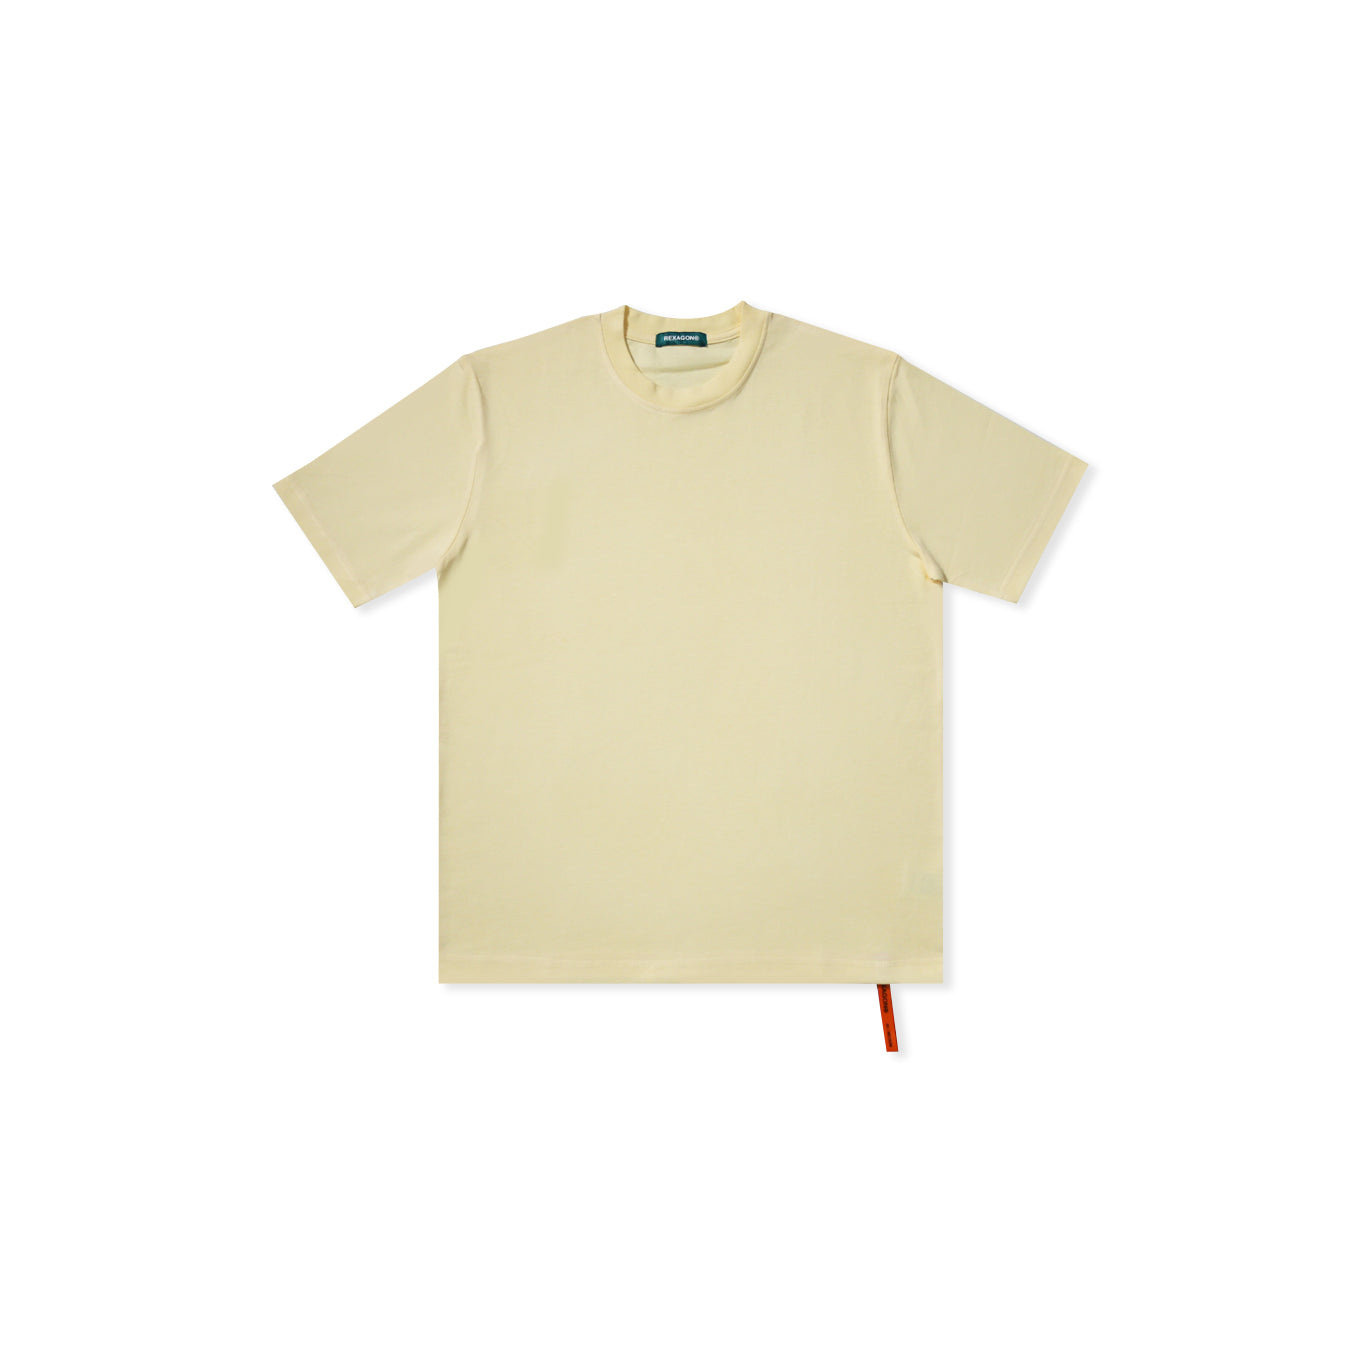 365 All Day Tees - Light Yellow